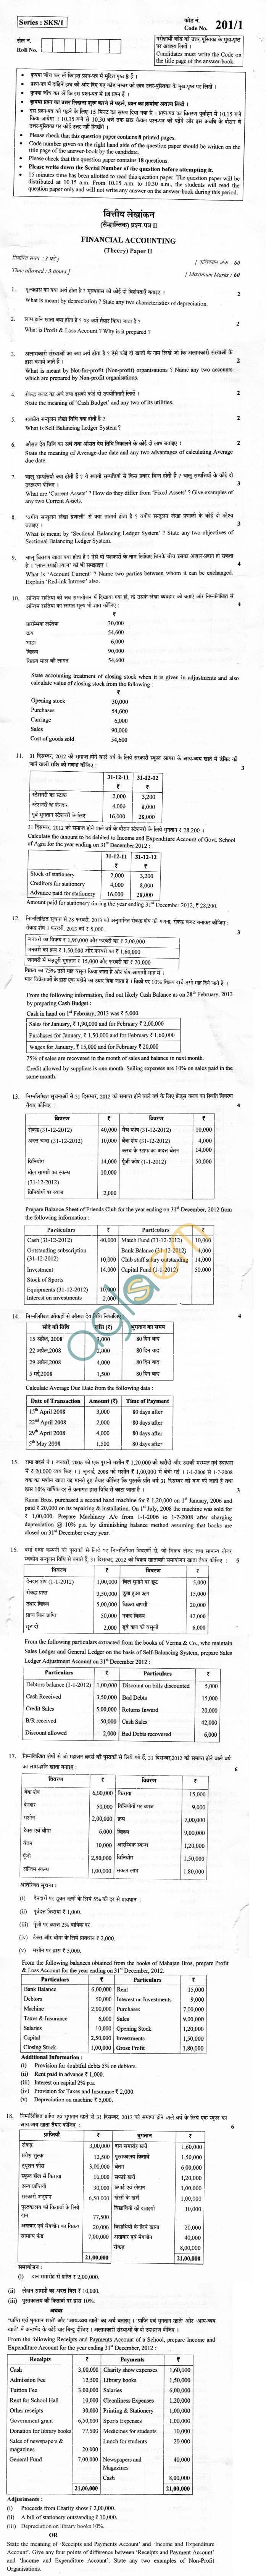 CBSE Board Exam 2013 Class XII Question Paper - Financial Accounting Paper II